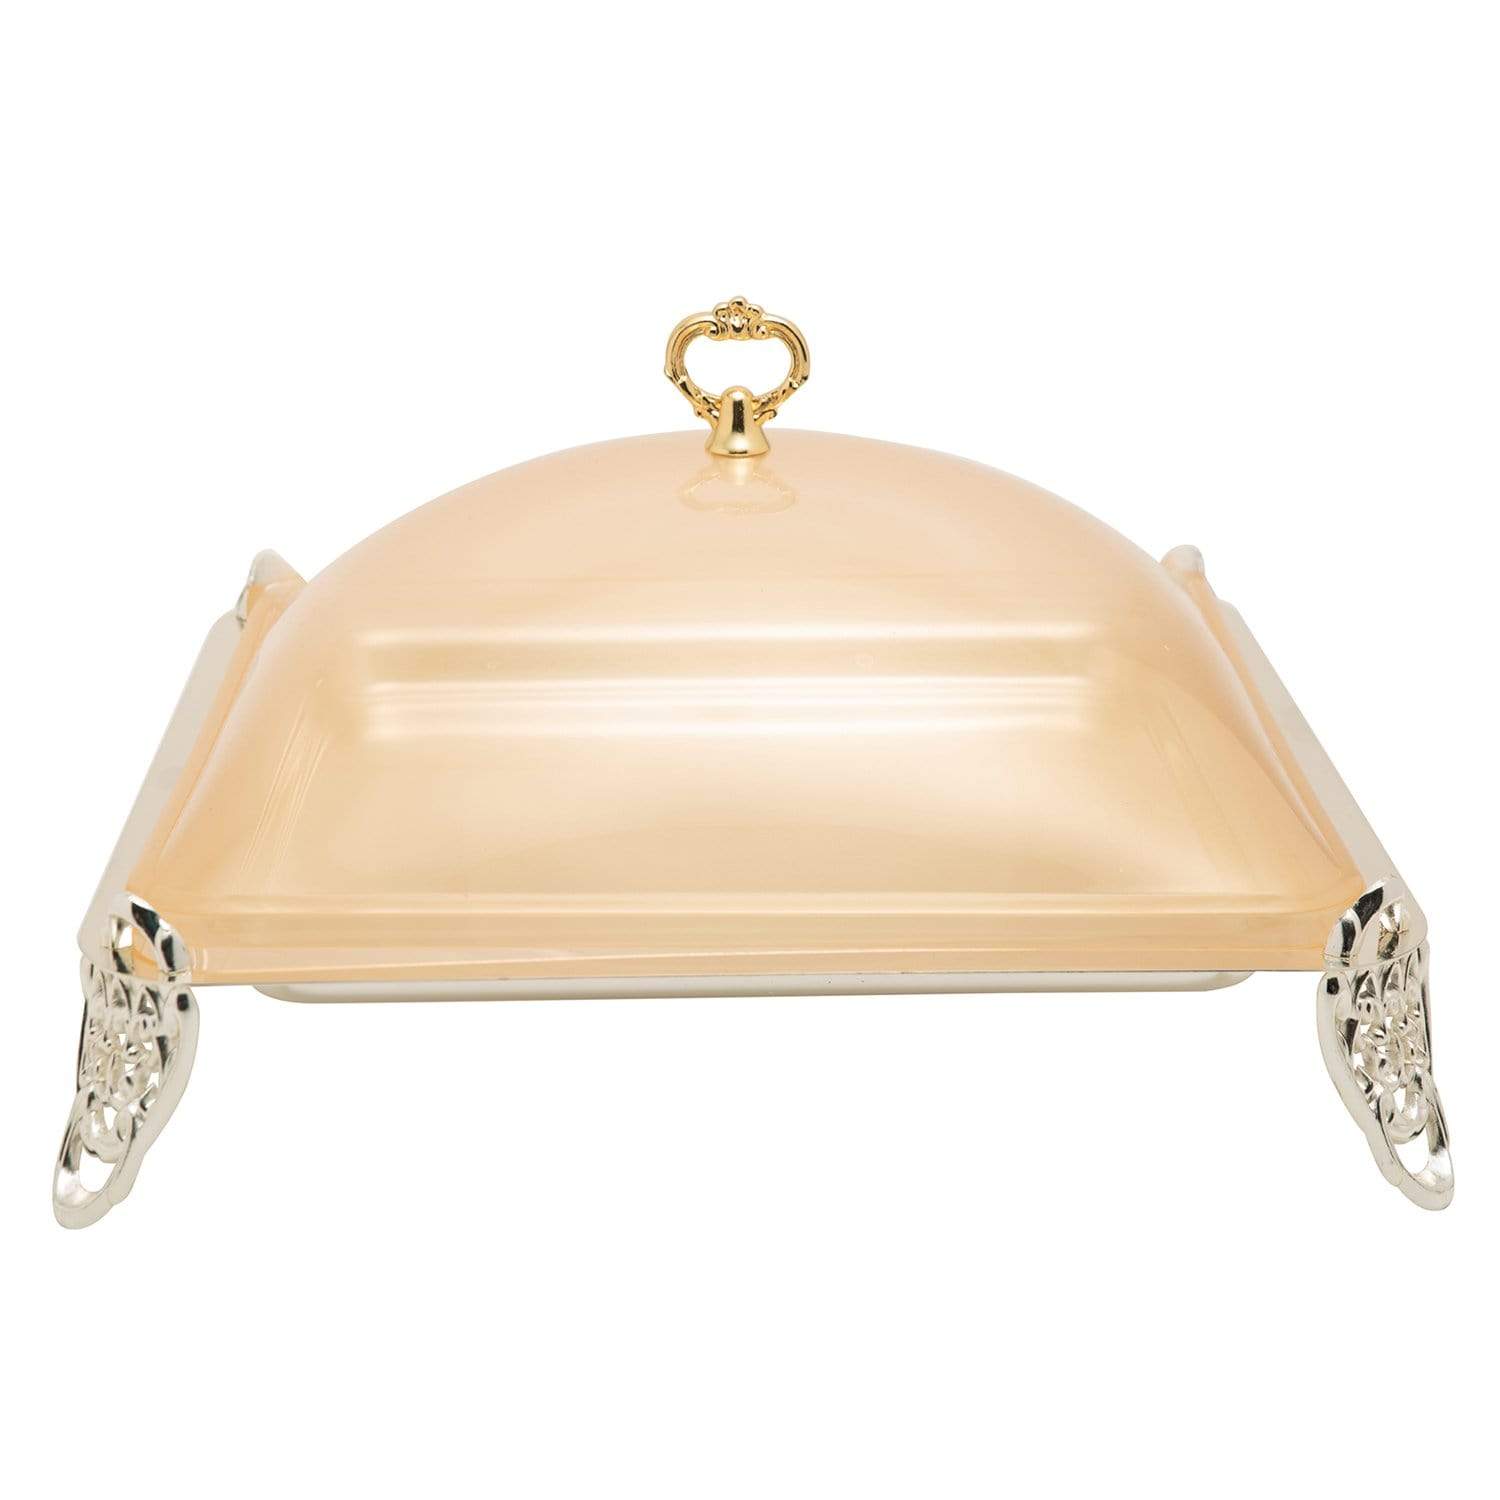 SILVER PLATED FOOTED SQUARE TRAY WITH GOLD COVER